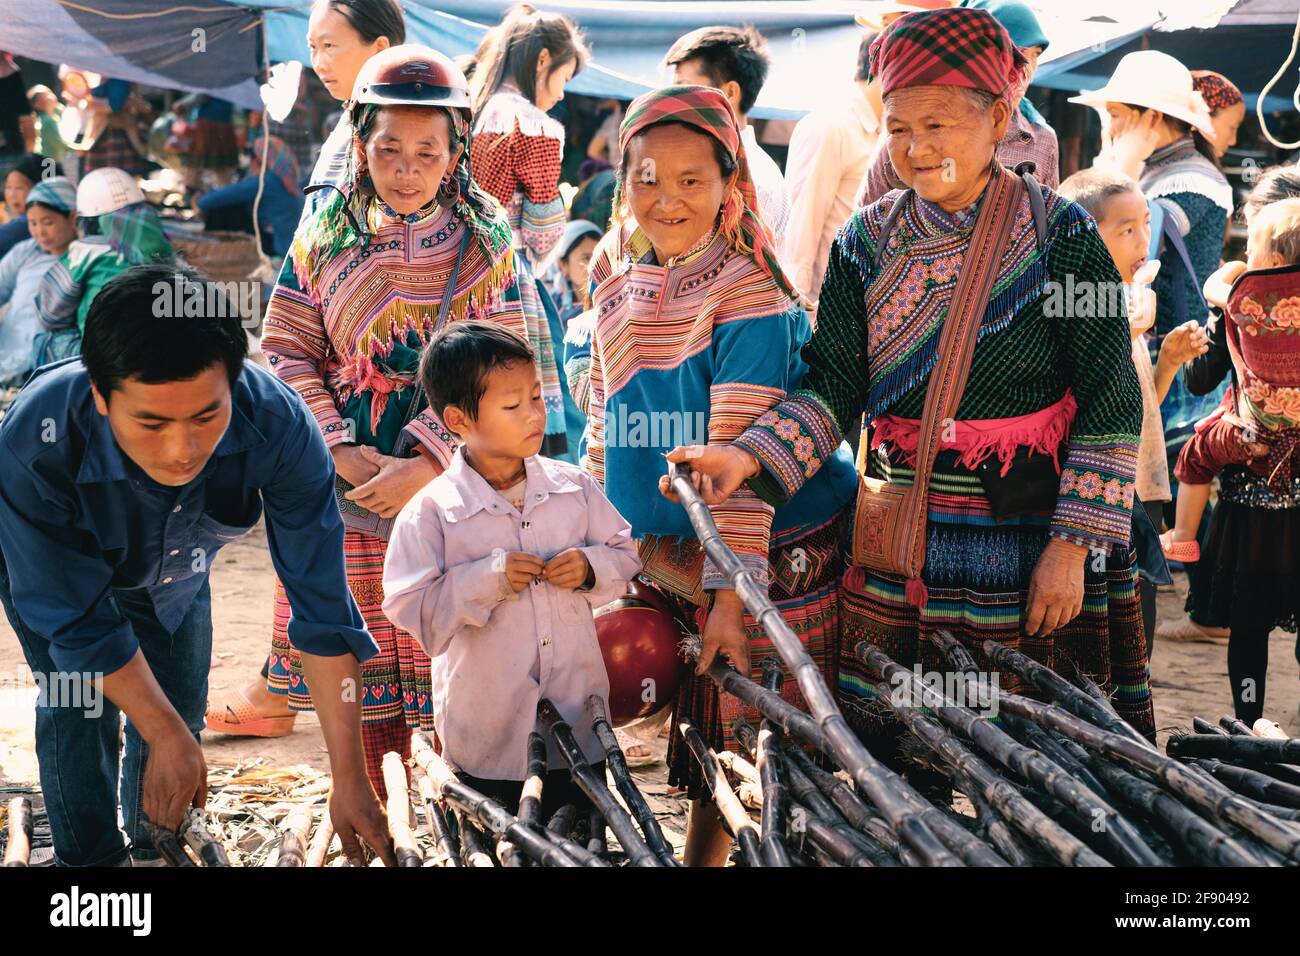 Bac Ha, Vietnam - April 4, 2016: Flower Hmong tribe in colorful traditional clothing with their child at Can Cau Saturday market in Vietnam Stock Photo